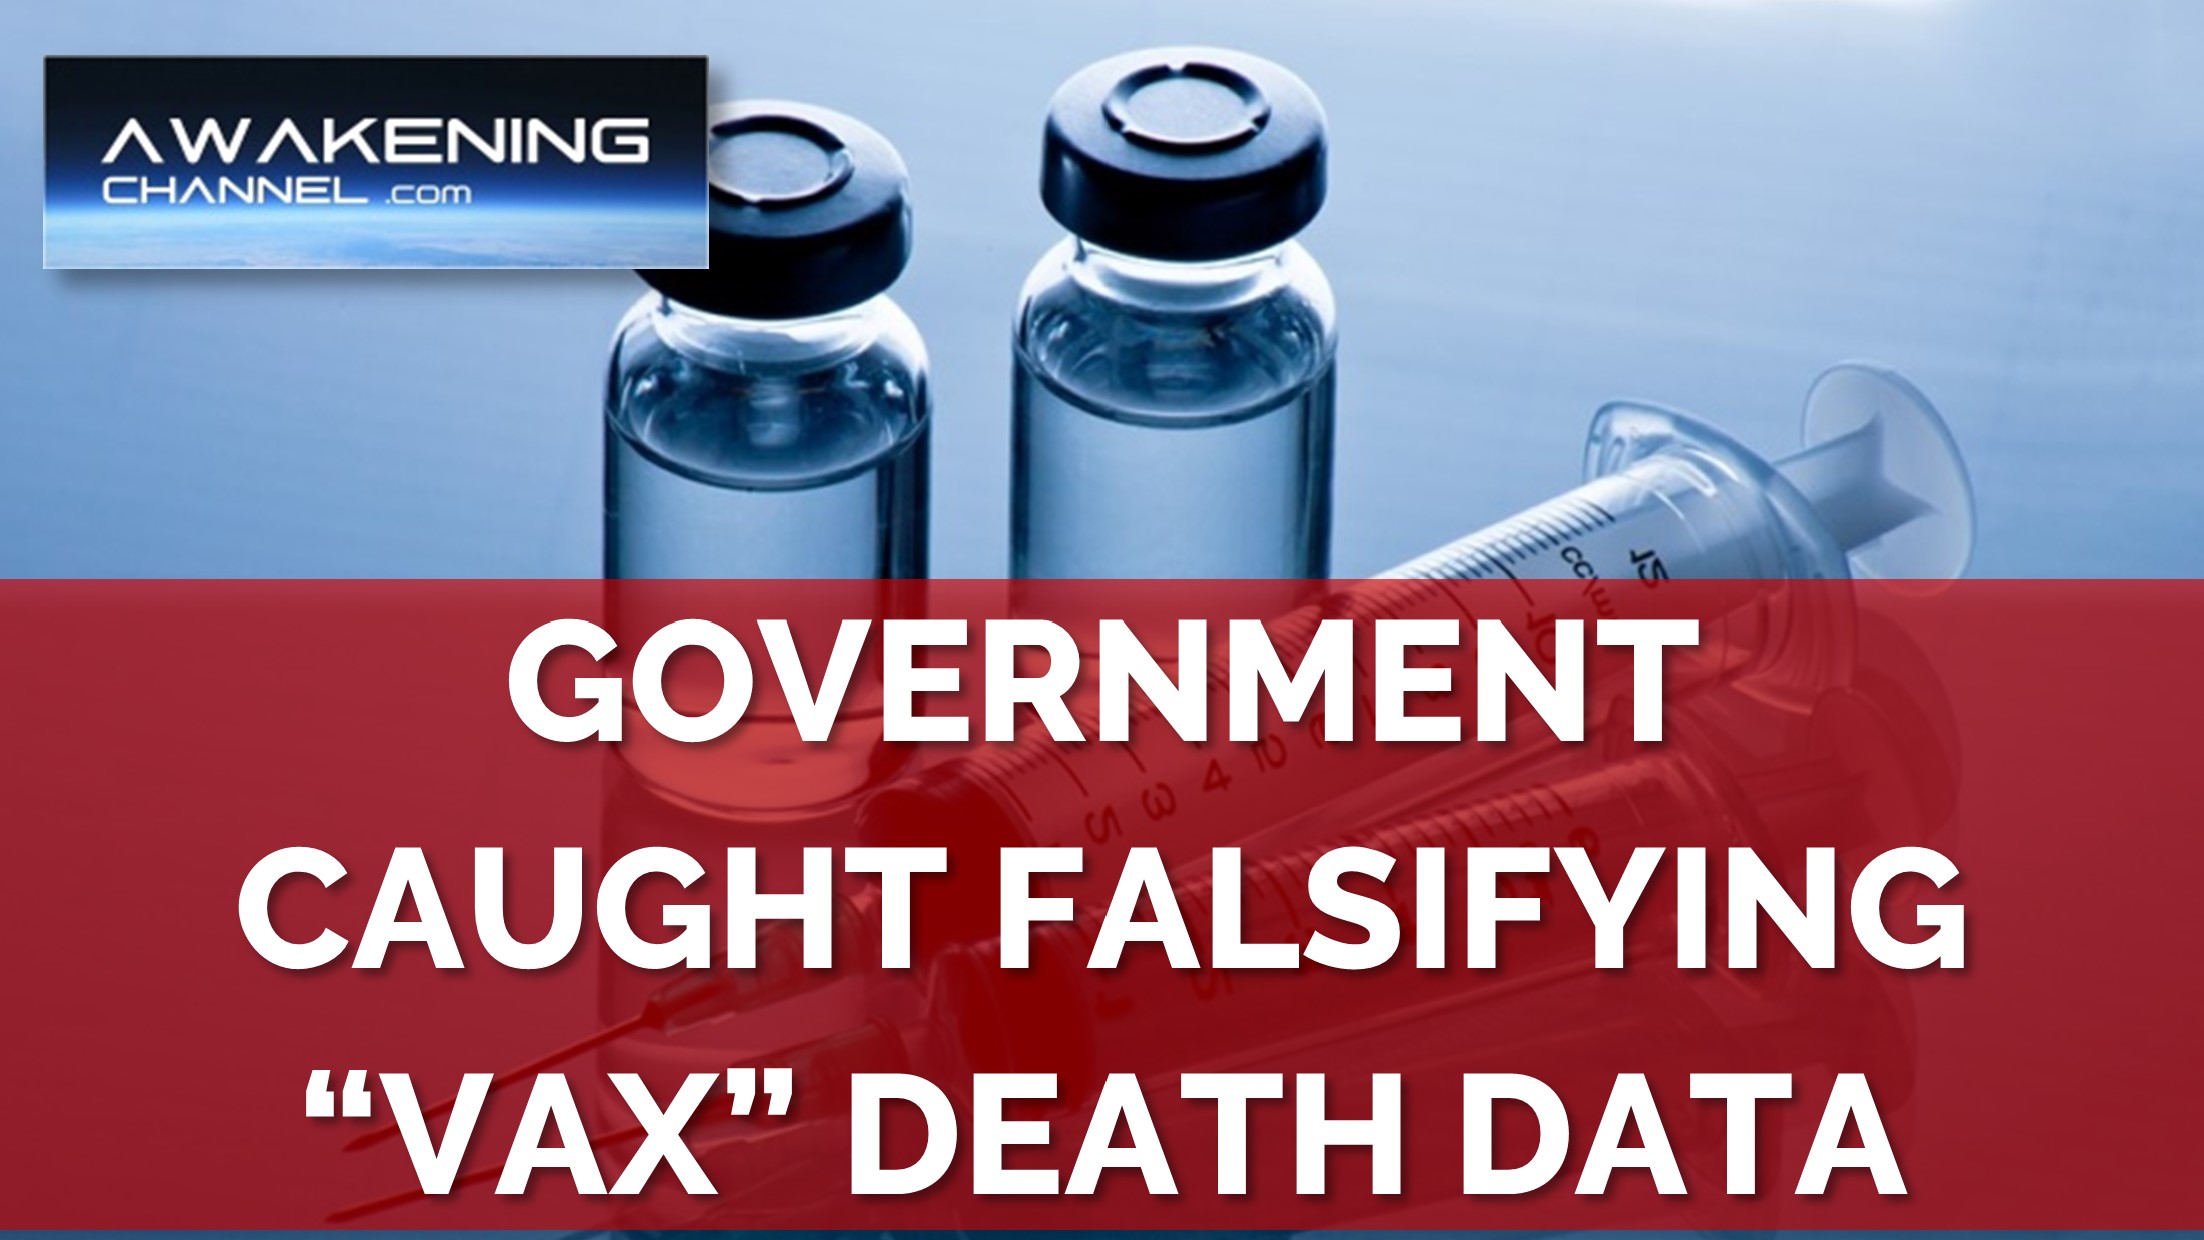 Government Caught Falsifying “Vax” Death Data